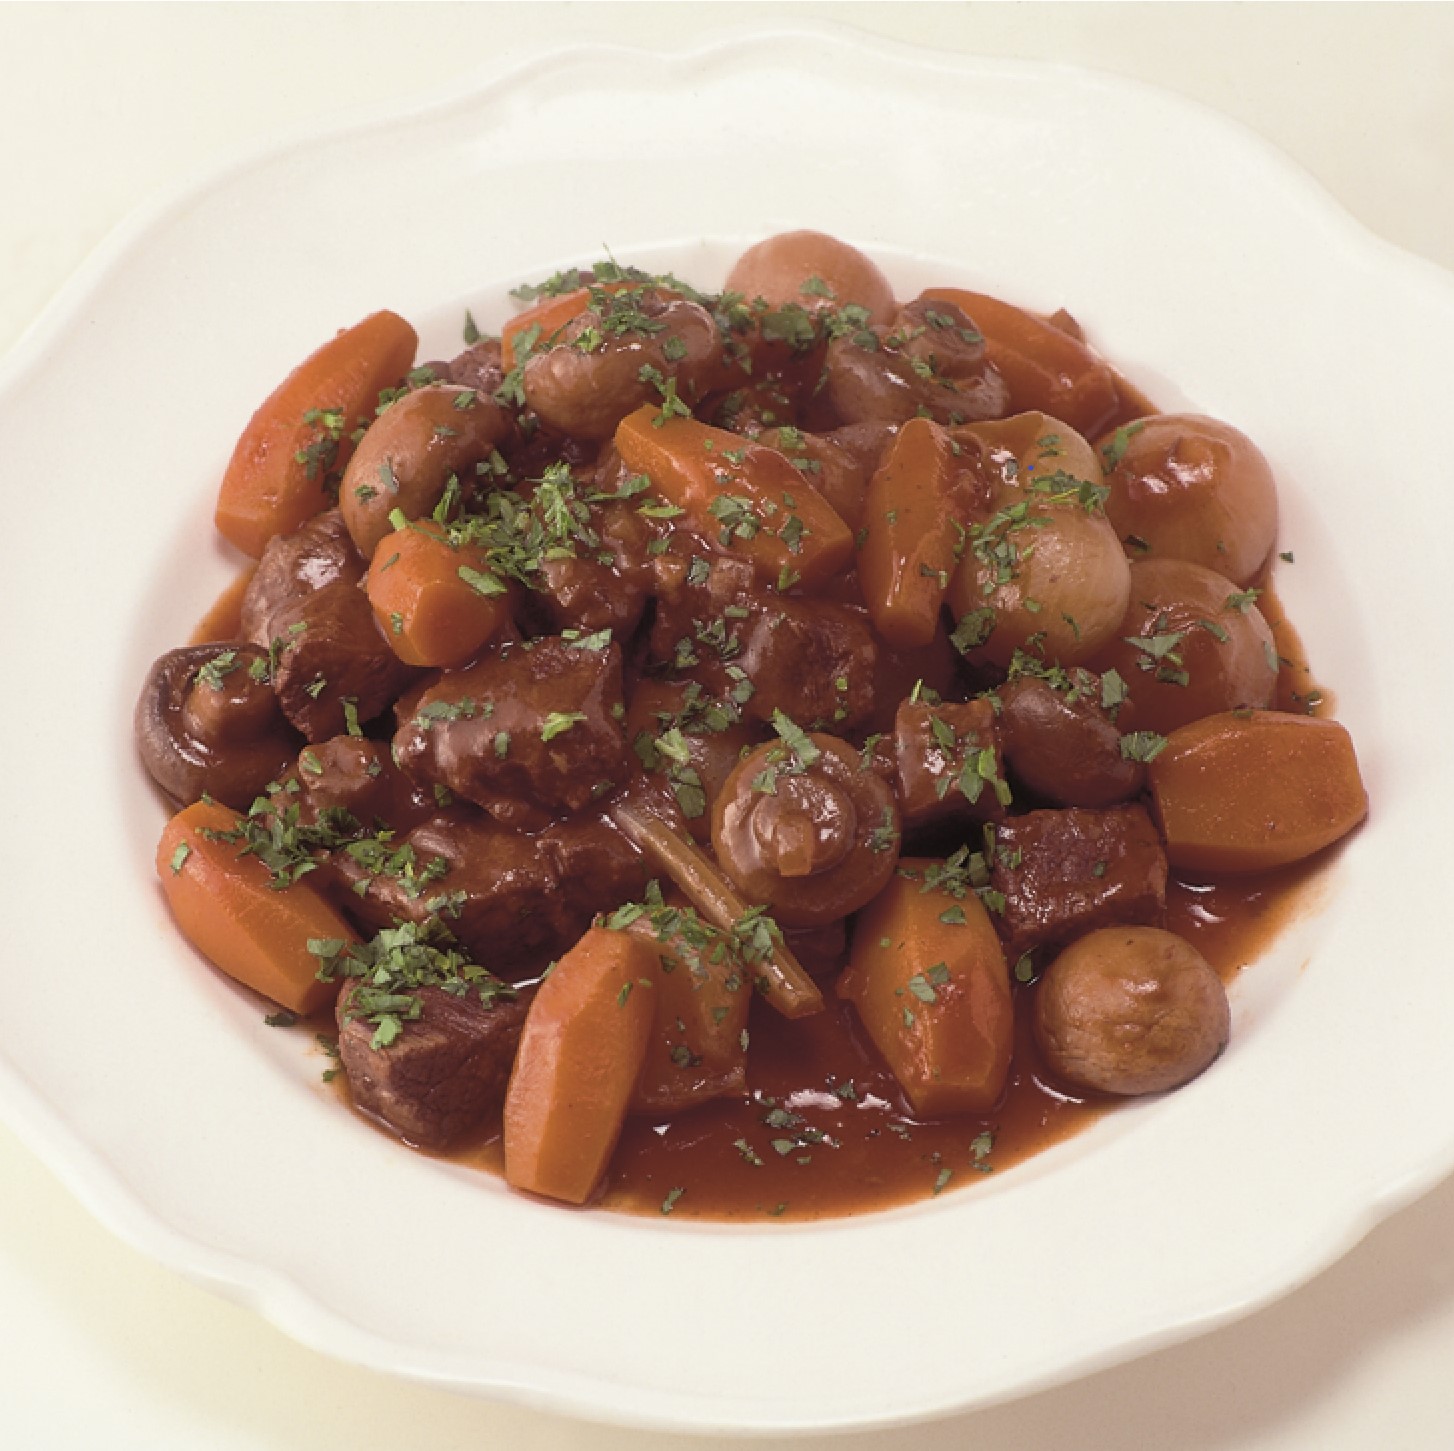 Plate of Beef Bouguignon with beef, carrots, mushrooms and celery in a tomato based gravy sprinkled with fresh thyme